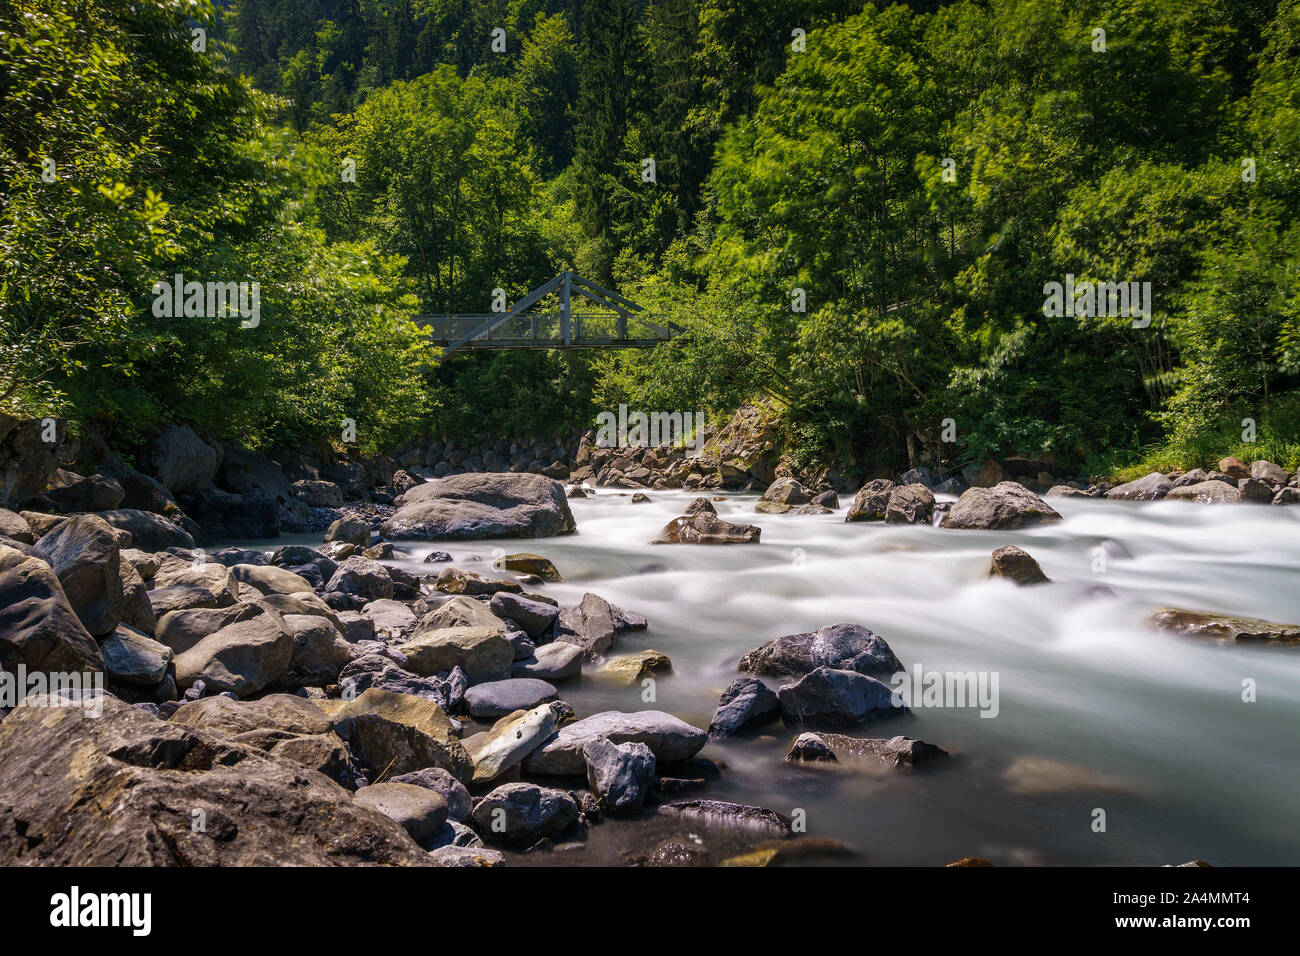 Kander river flowing near Blausee lake in the Bernese Oberland, Switzerland Stock Photo